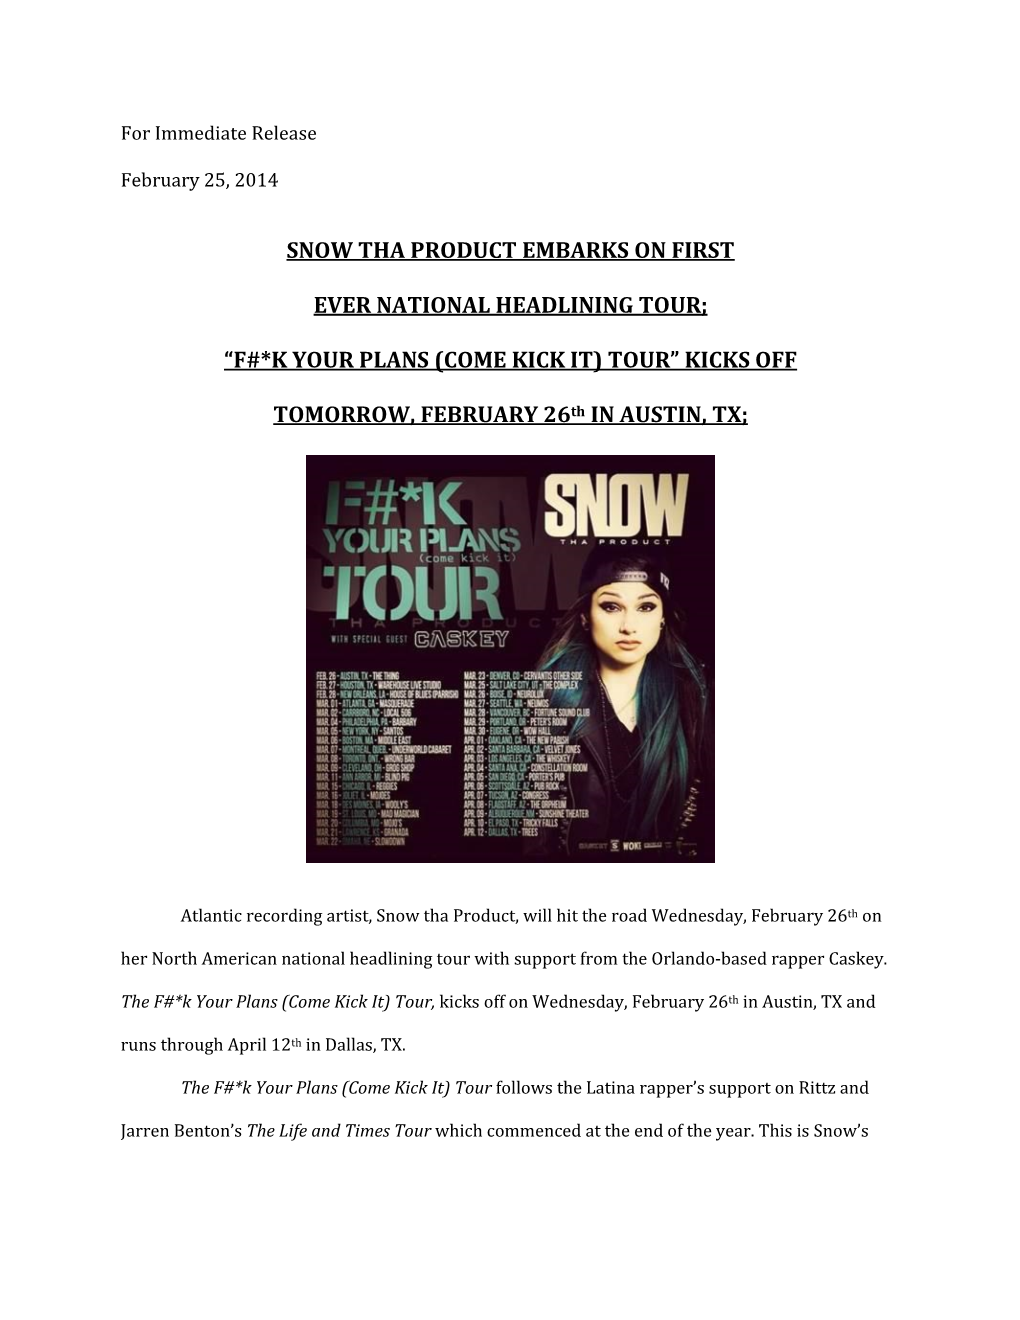 Snow Tha Product Embarks on First